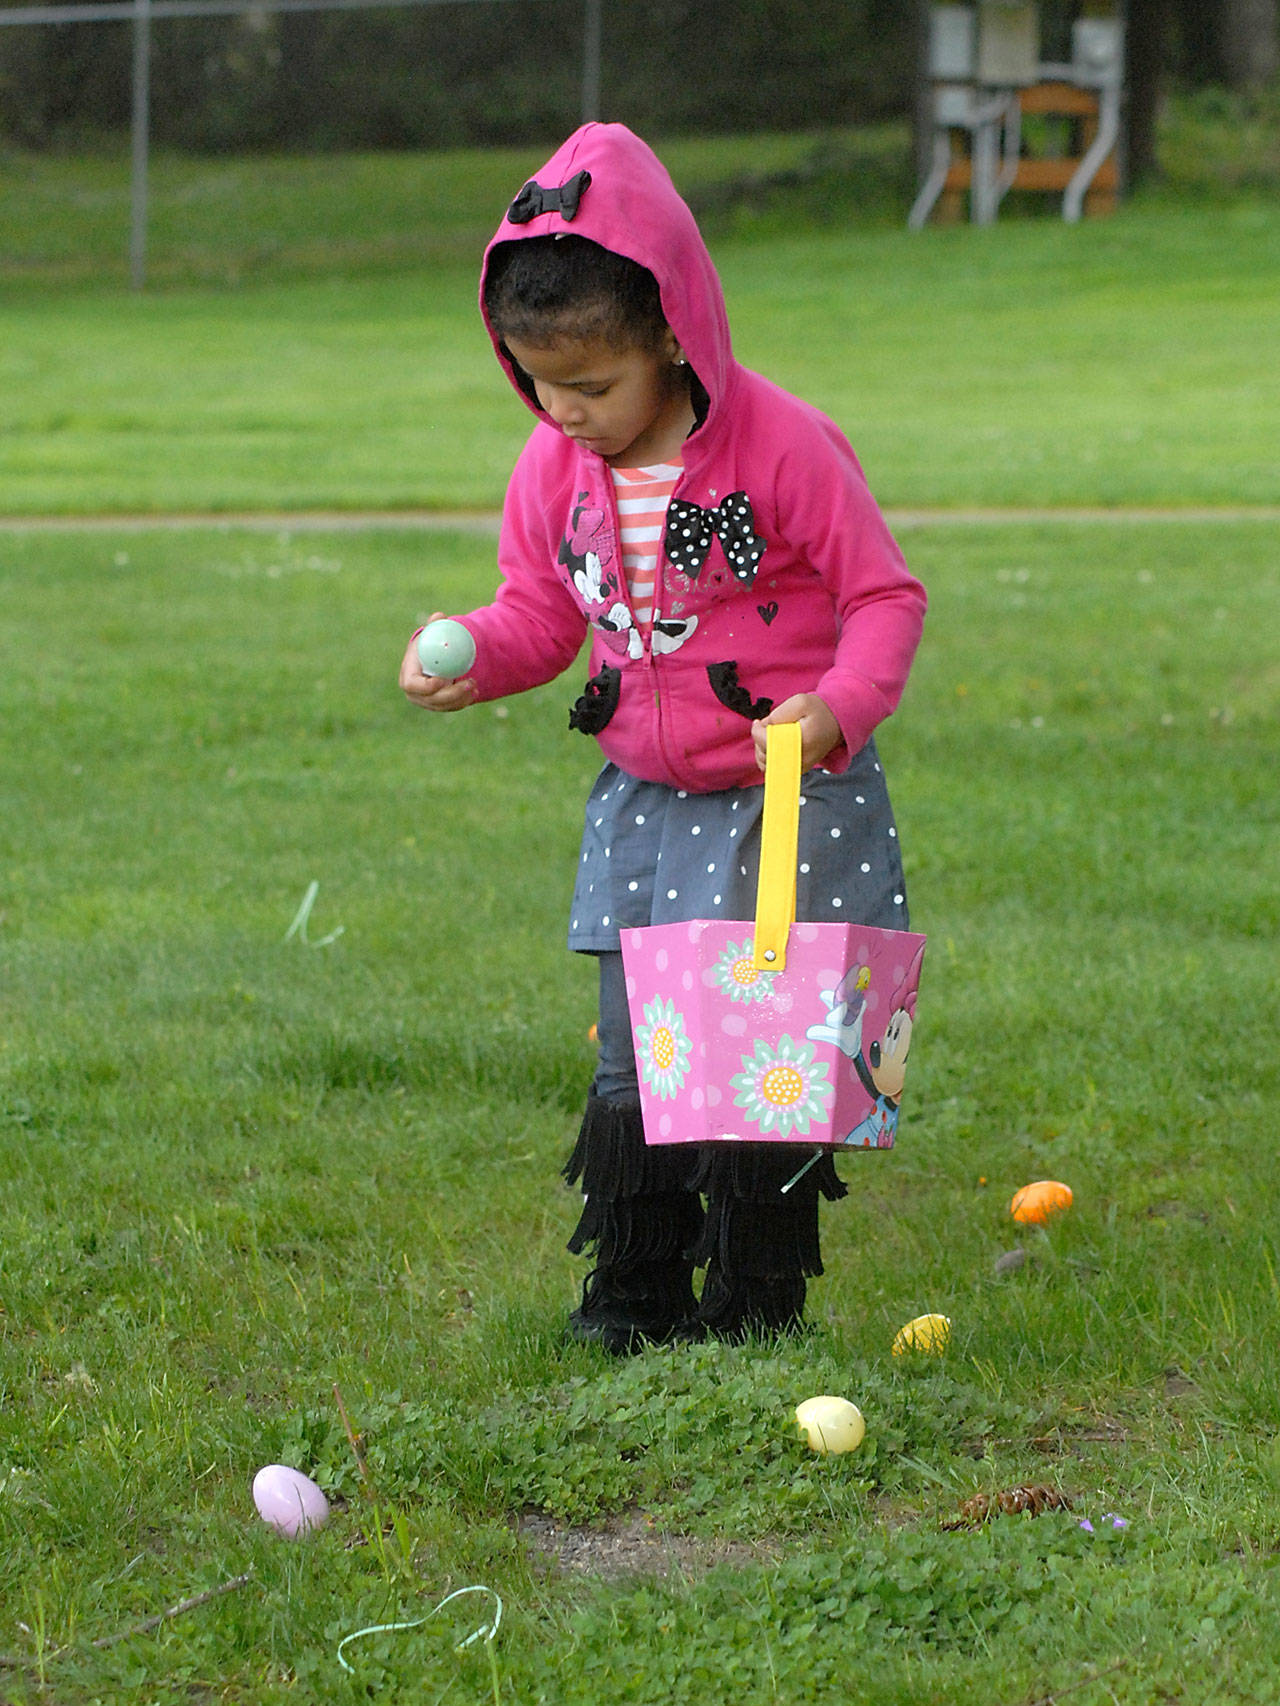 Avacynb Casas, 3, of Port Angeles collects prize-filled eggs at the 39th annual KONP Easter egg hunt at the Clallam County Fairgrounds in Port Angeles on Saturday. (Keith Thorpe/Peninsula Daily News)